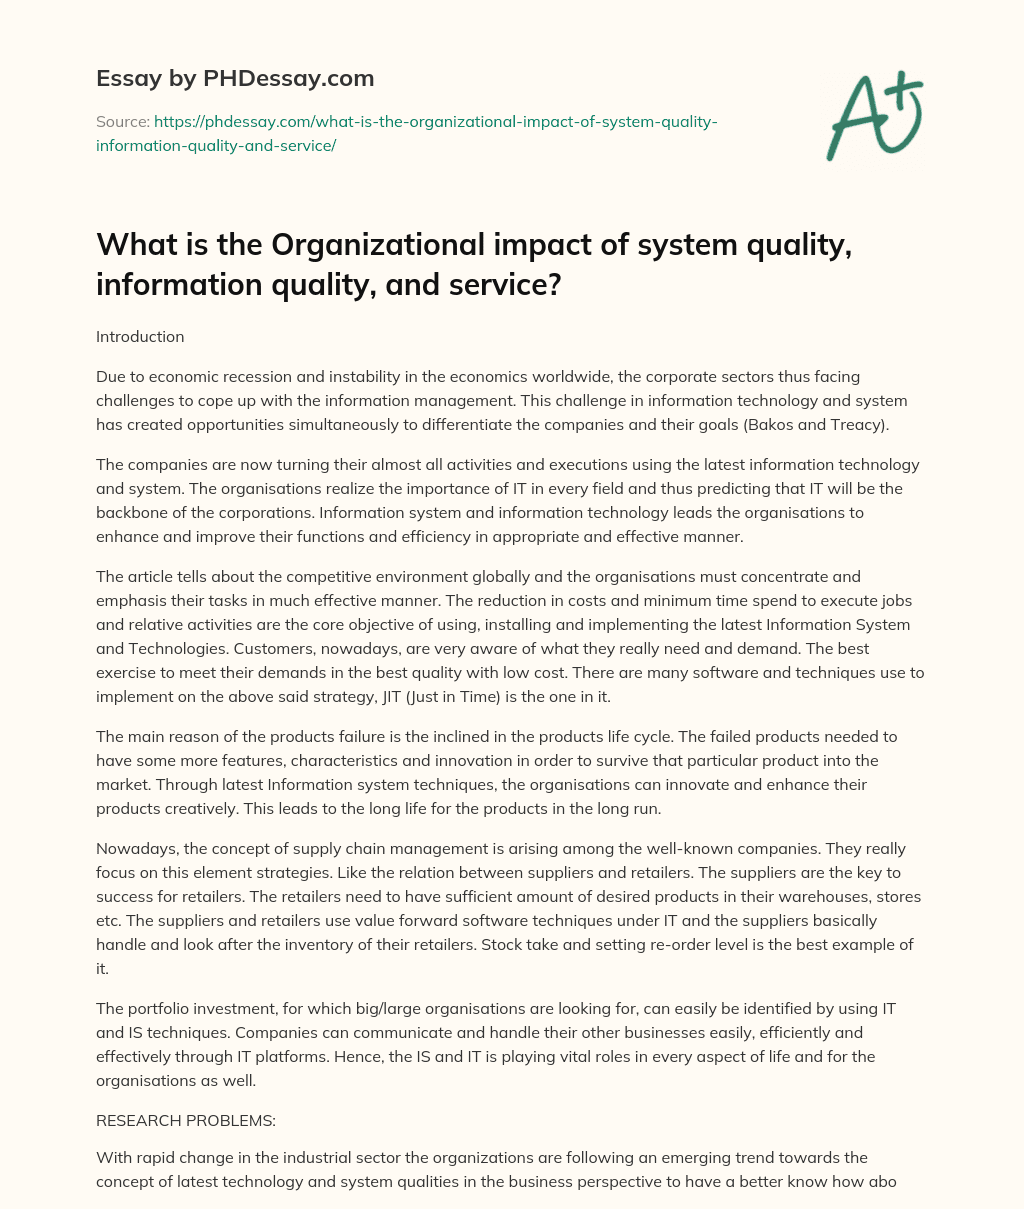 What is the Organizational impact of system quality, information quality, and service? essay